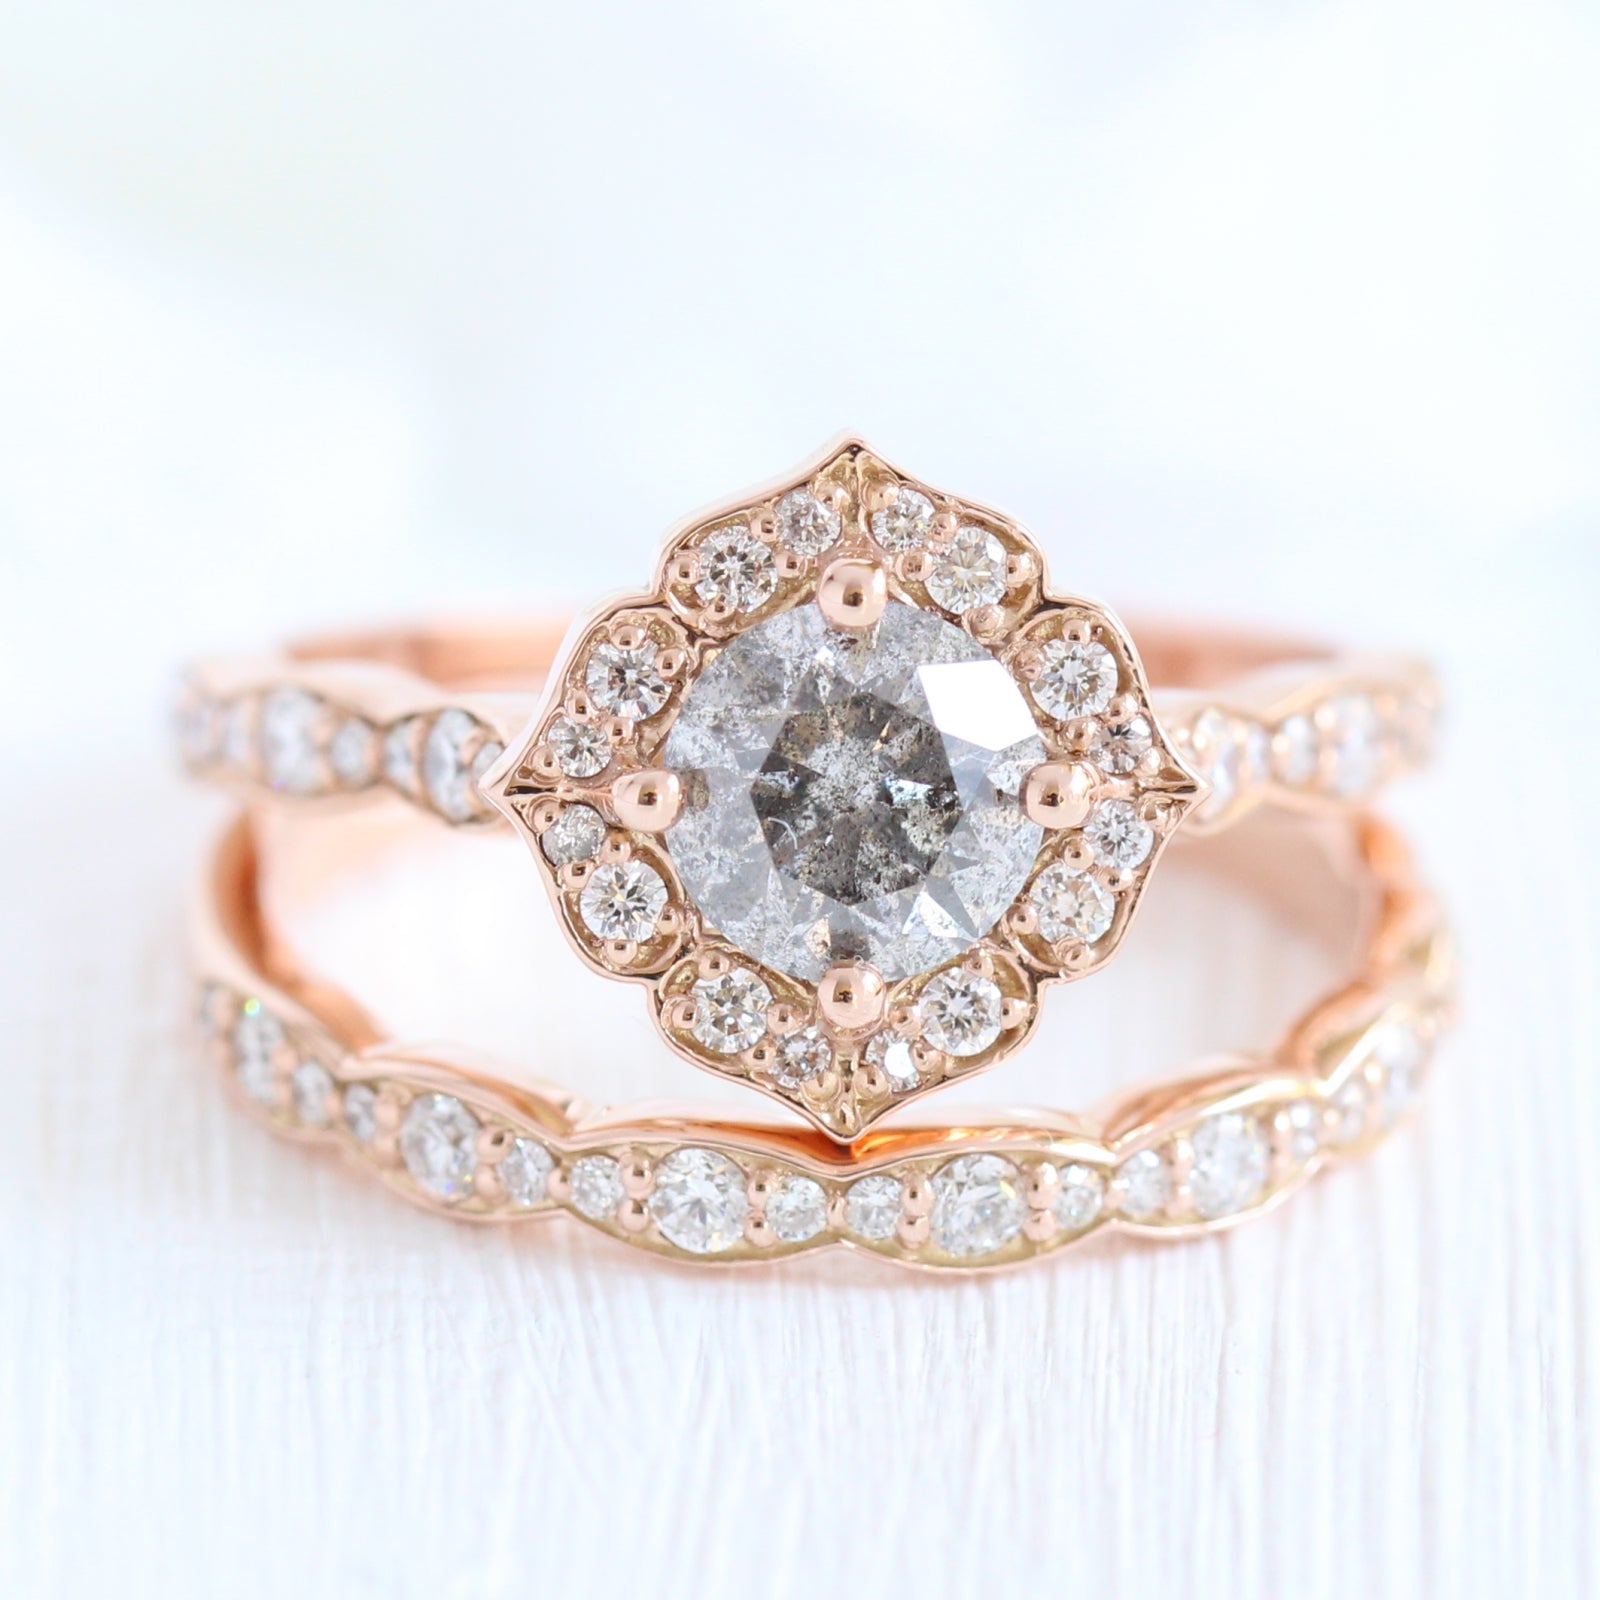 Emerald Cut Diamond Wedding Two Ring Set, Vintage Cluster Diamond Ring,  Unique Engagement Ring, Two Bridal Rose Gold Wedding Set, Spark -   Canada